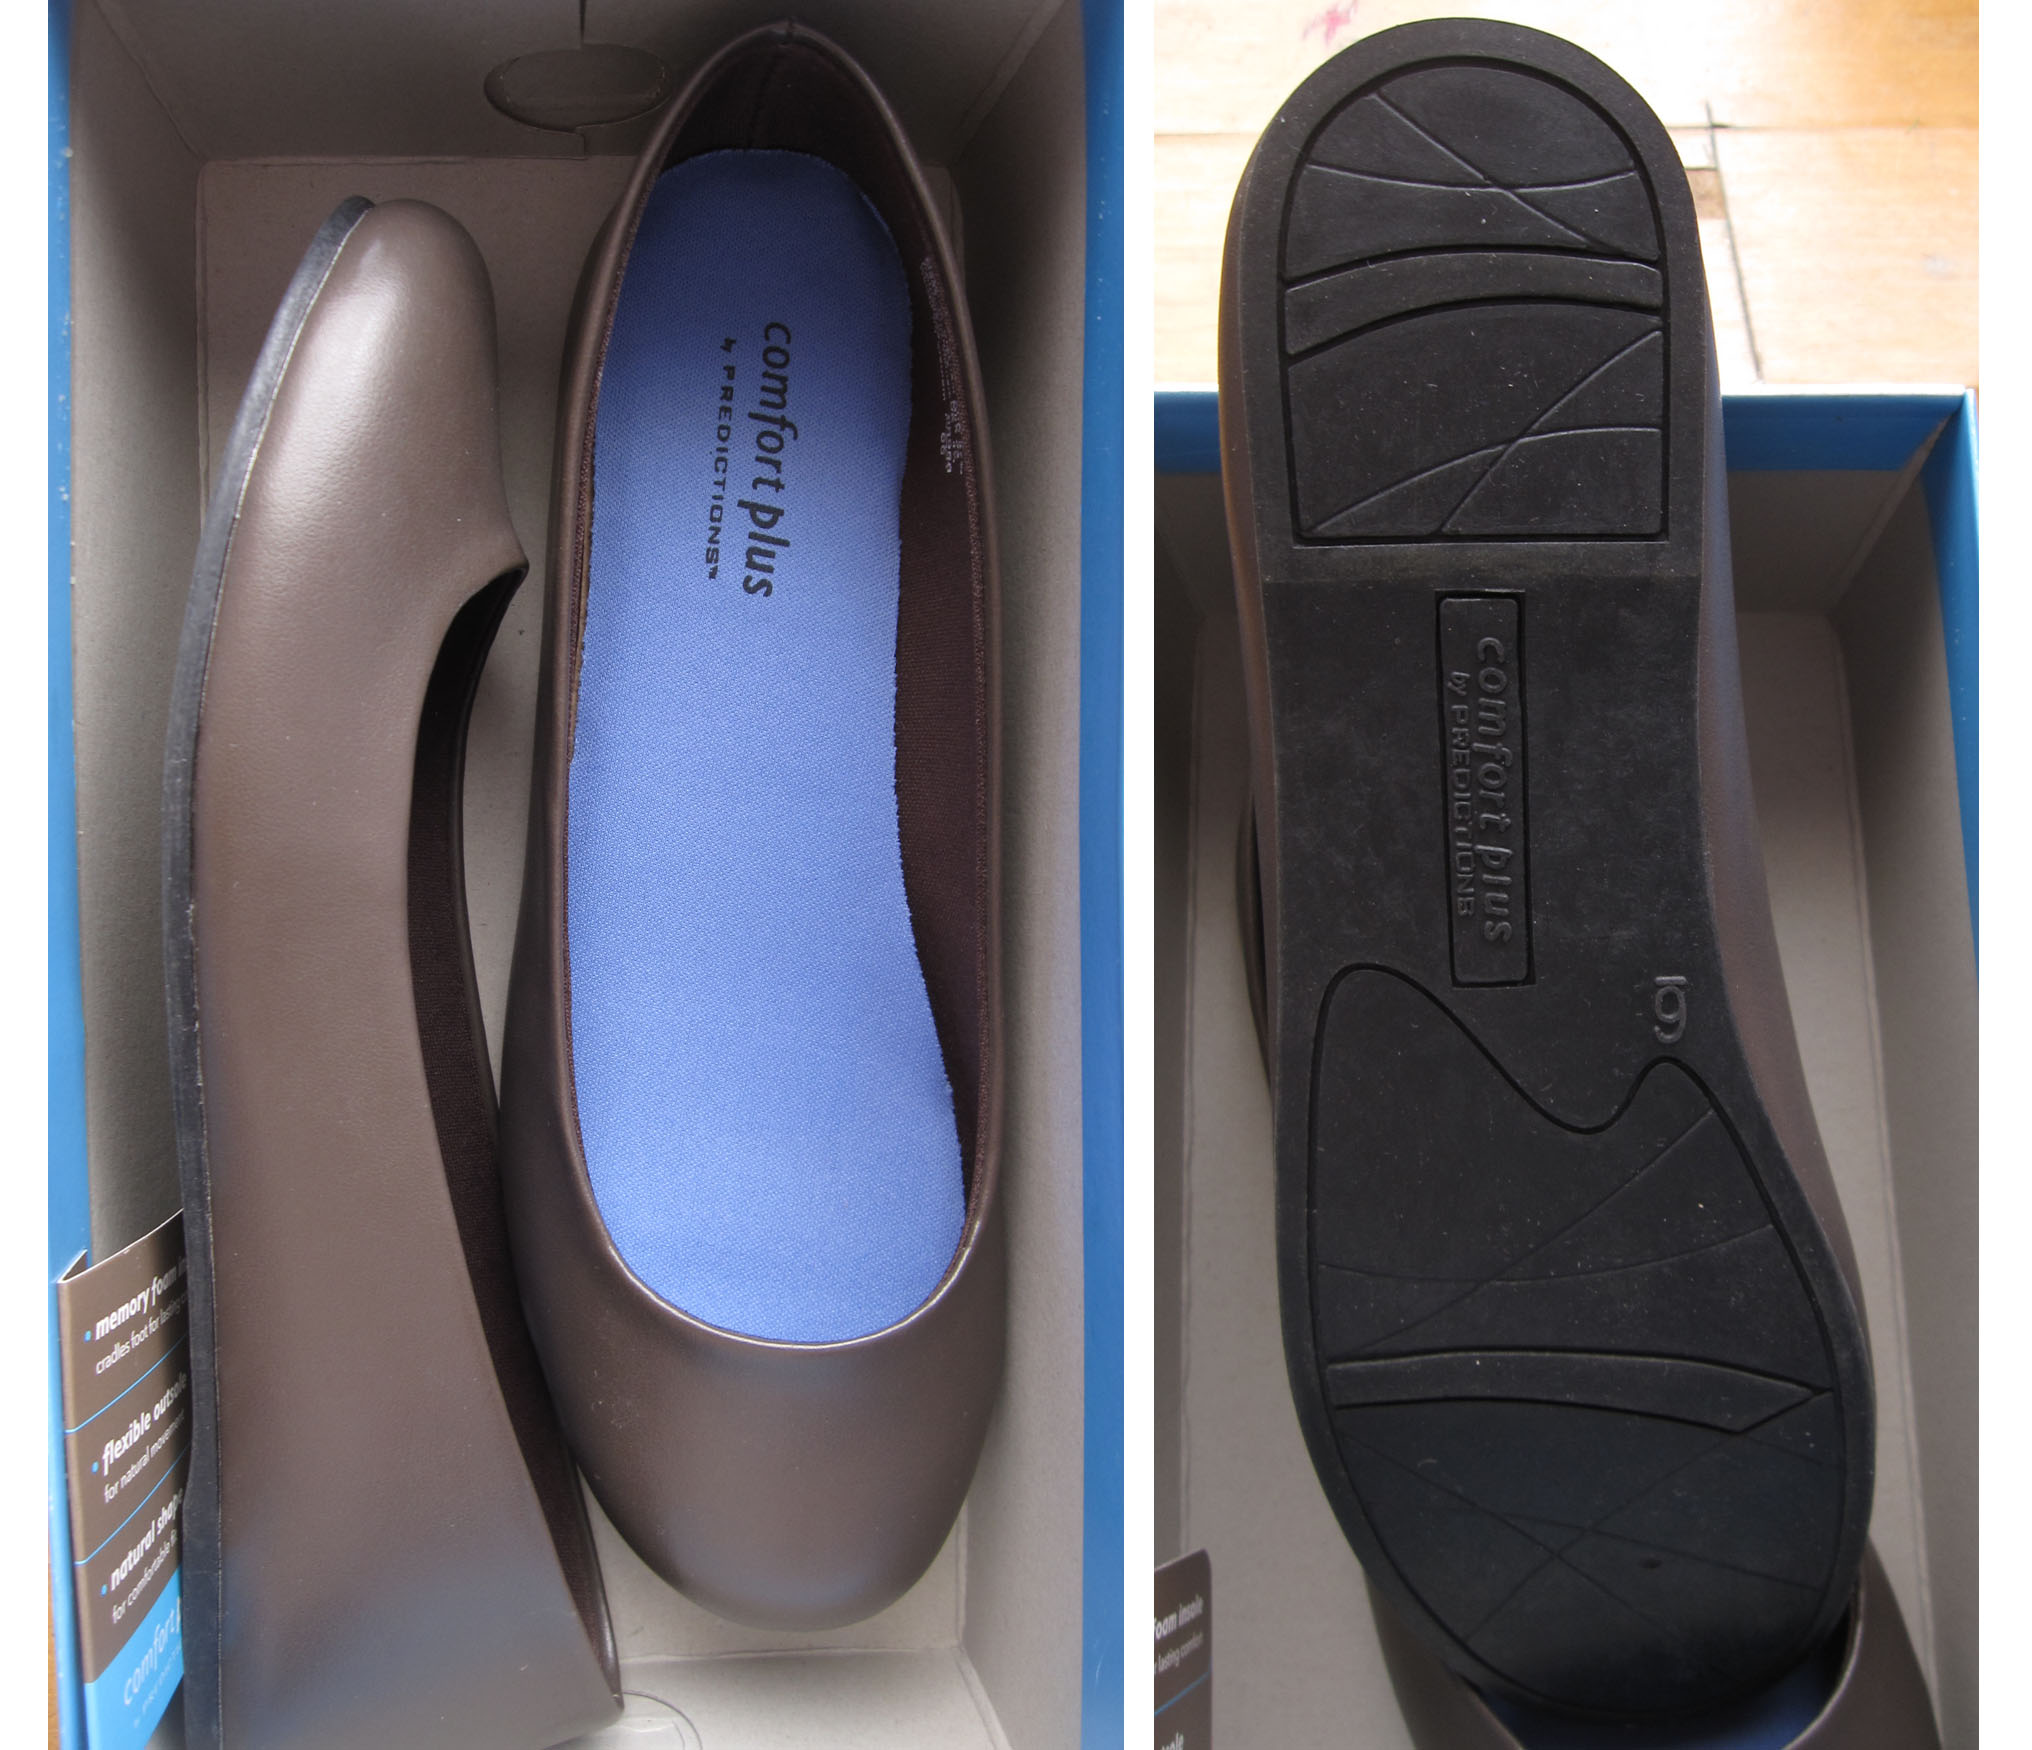 comfort plus by predictions flats